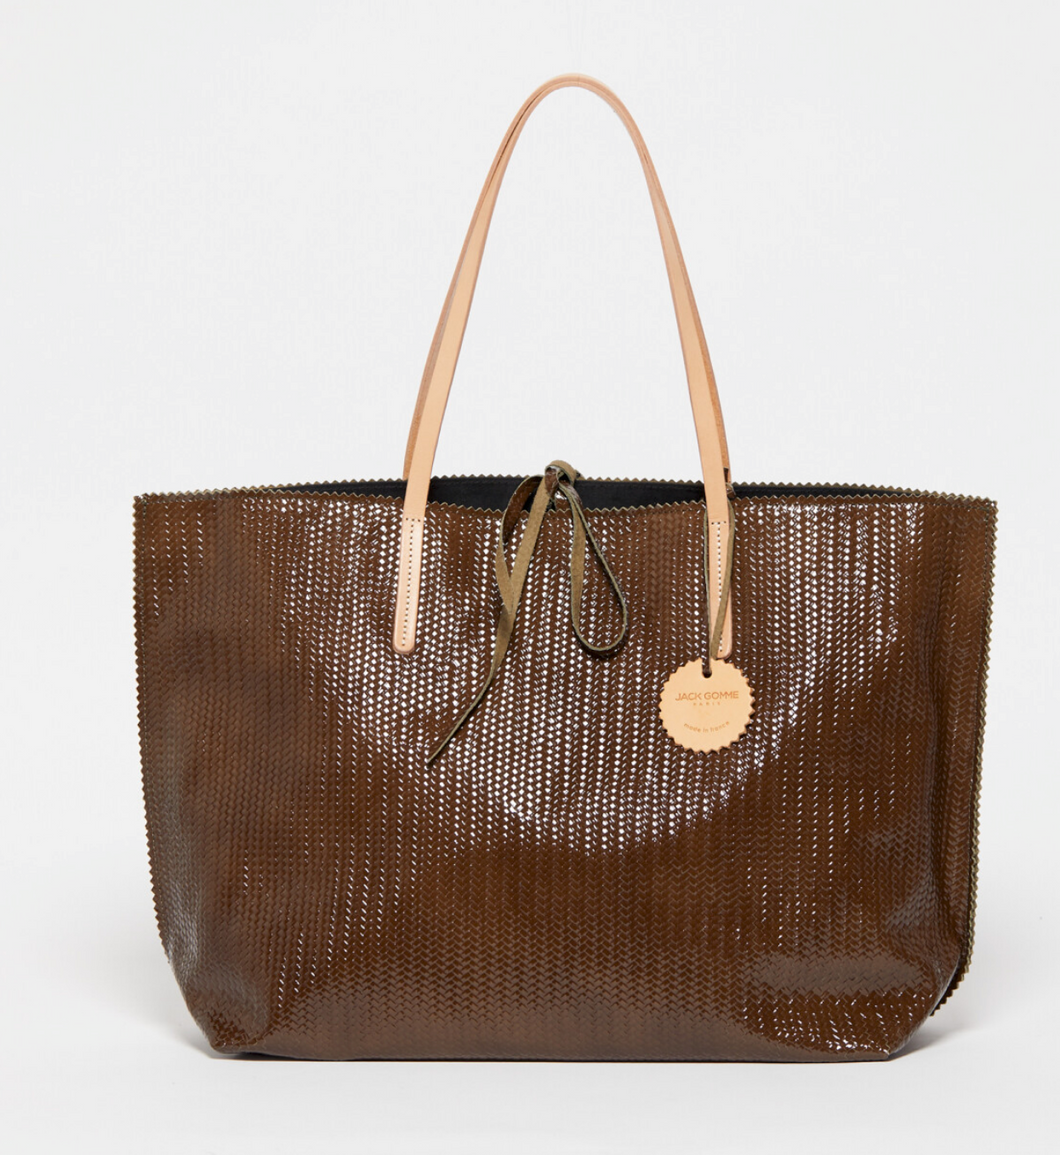 Jack Gomme Embossed Leather Tote LIBRE